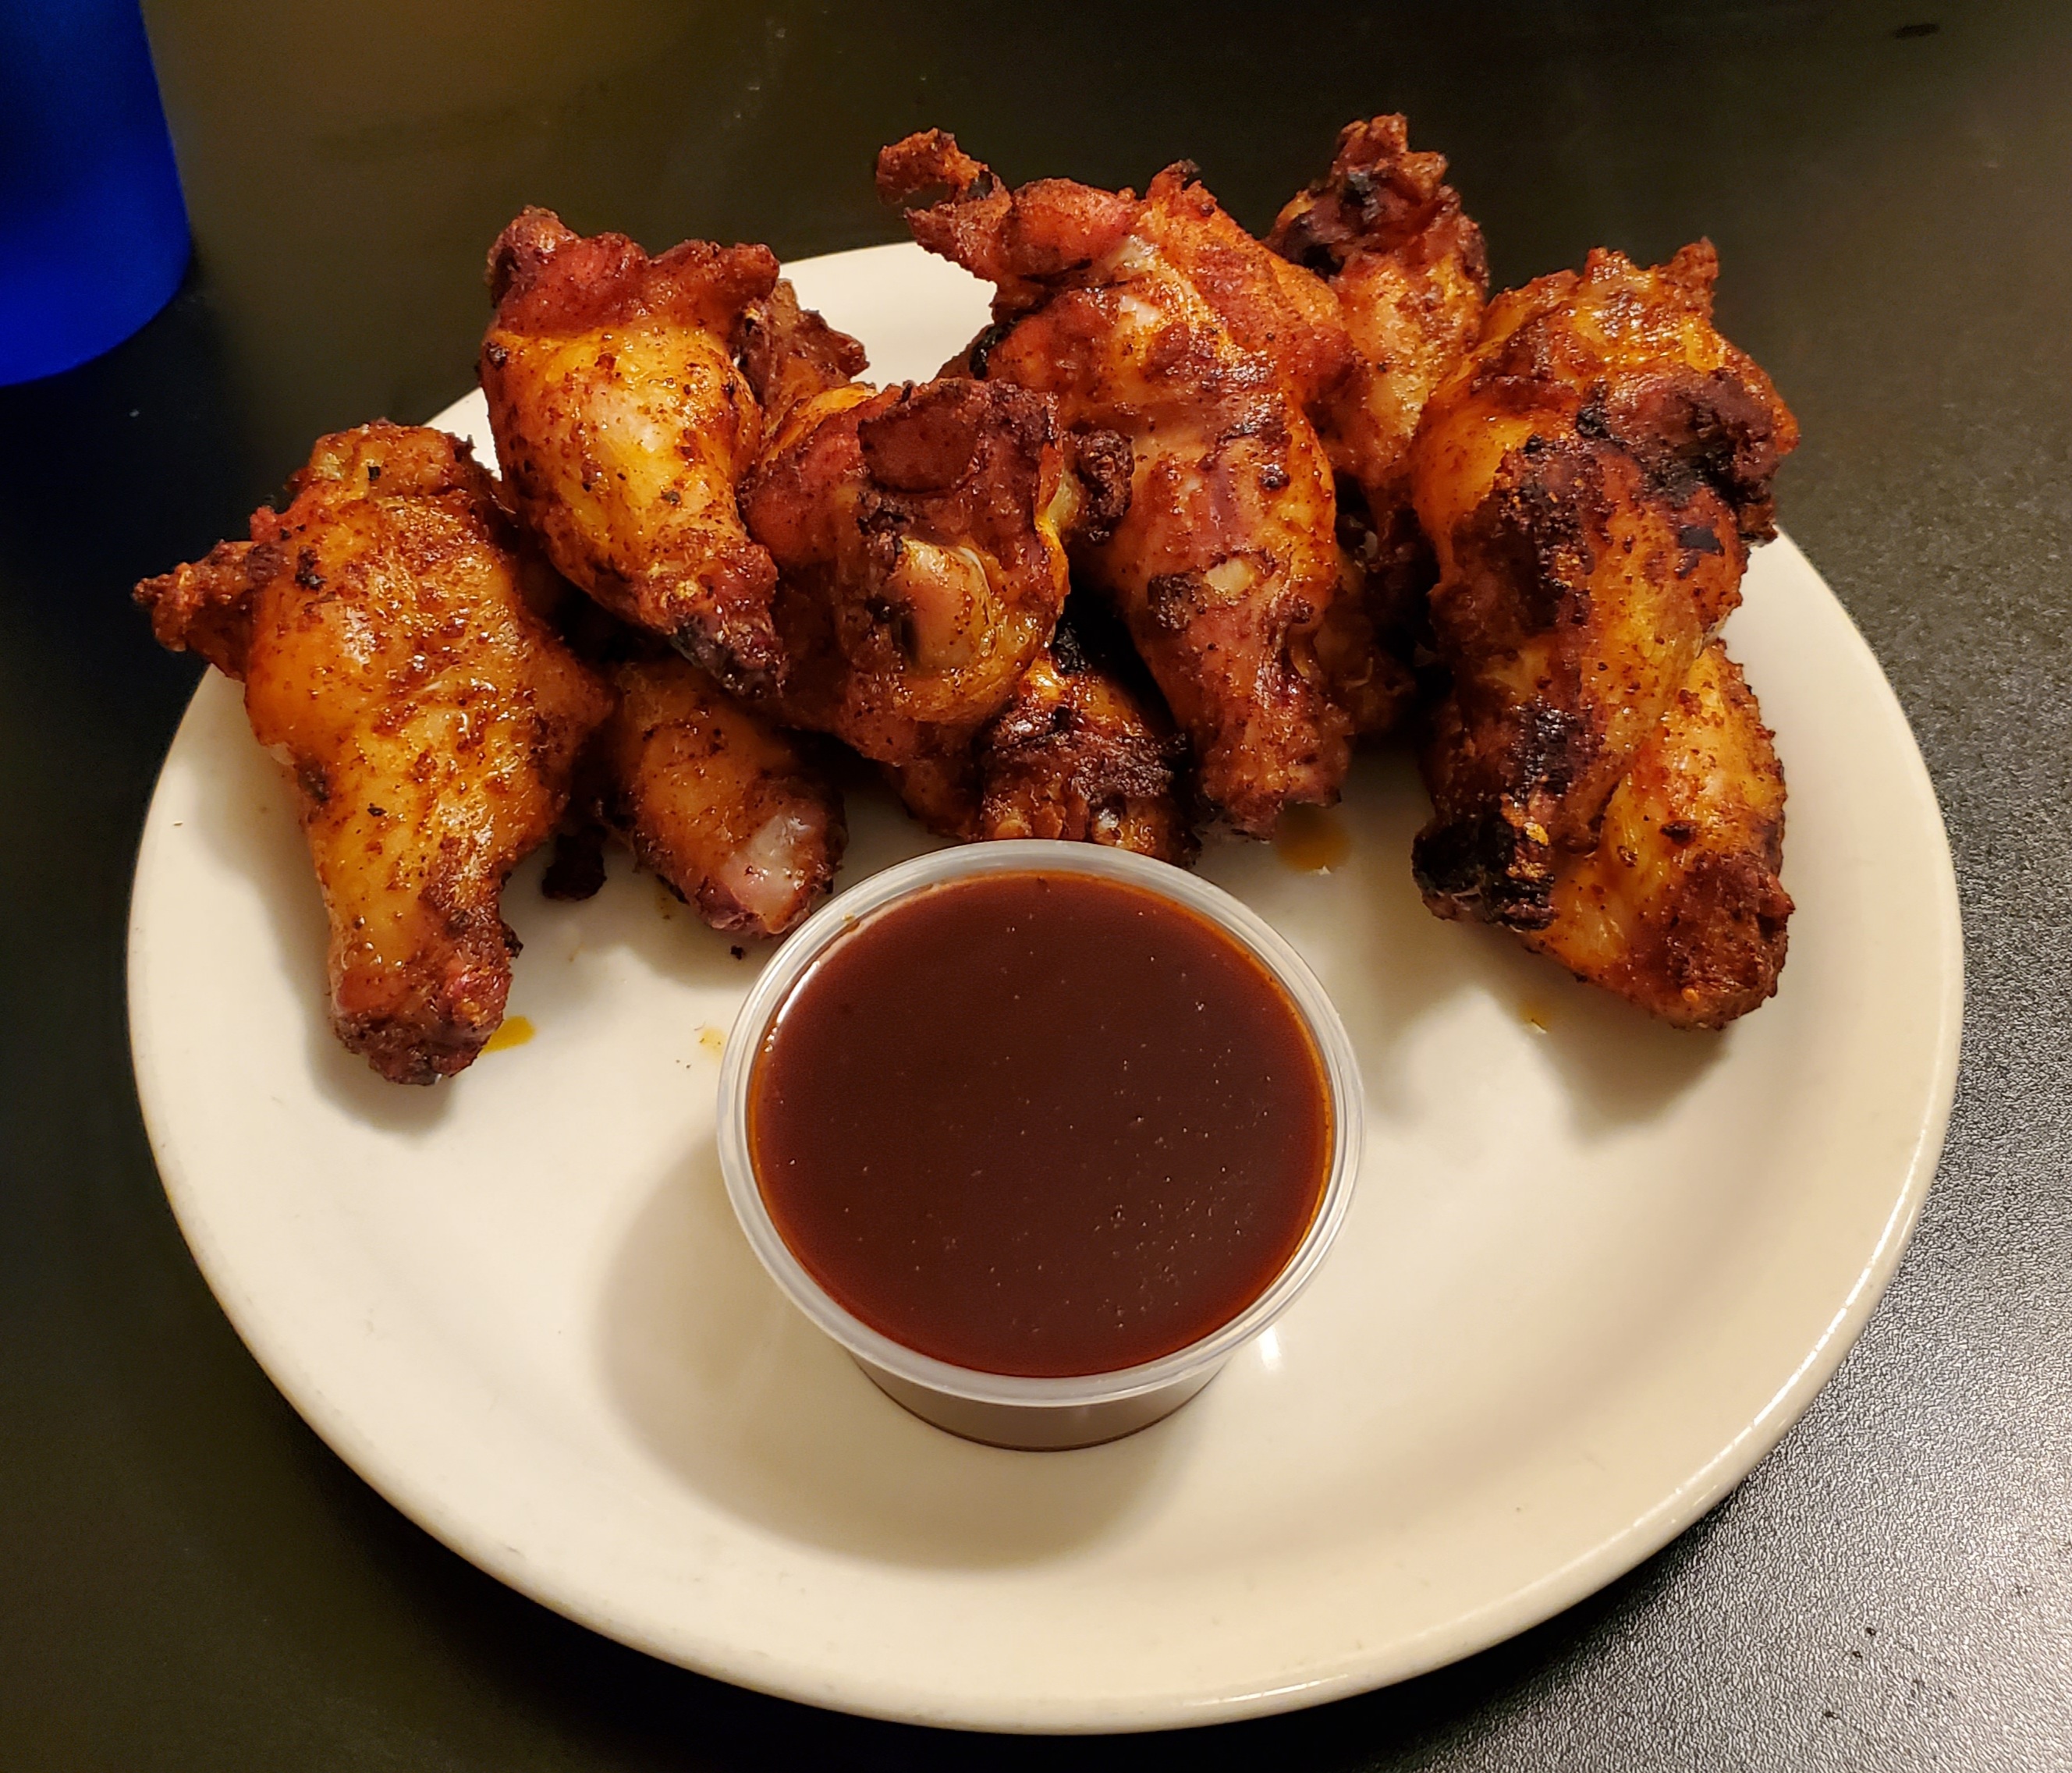 On a white plate, there are six chicken wings arranged in an arch above a cup of sauce. Photo by Carl Busch.